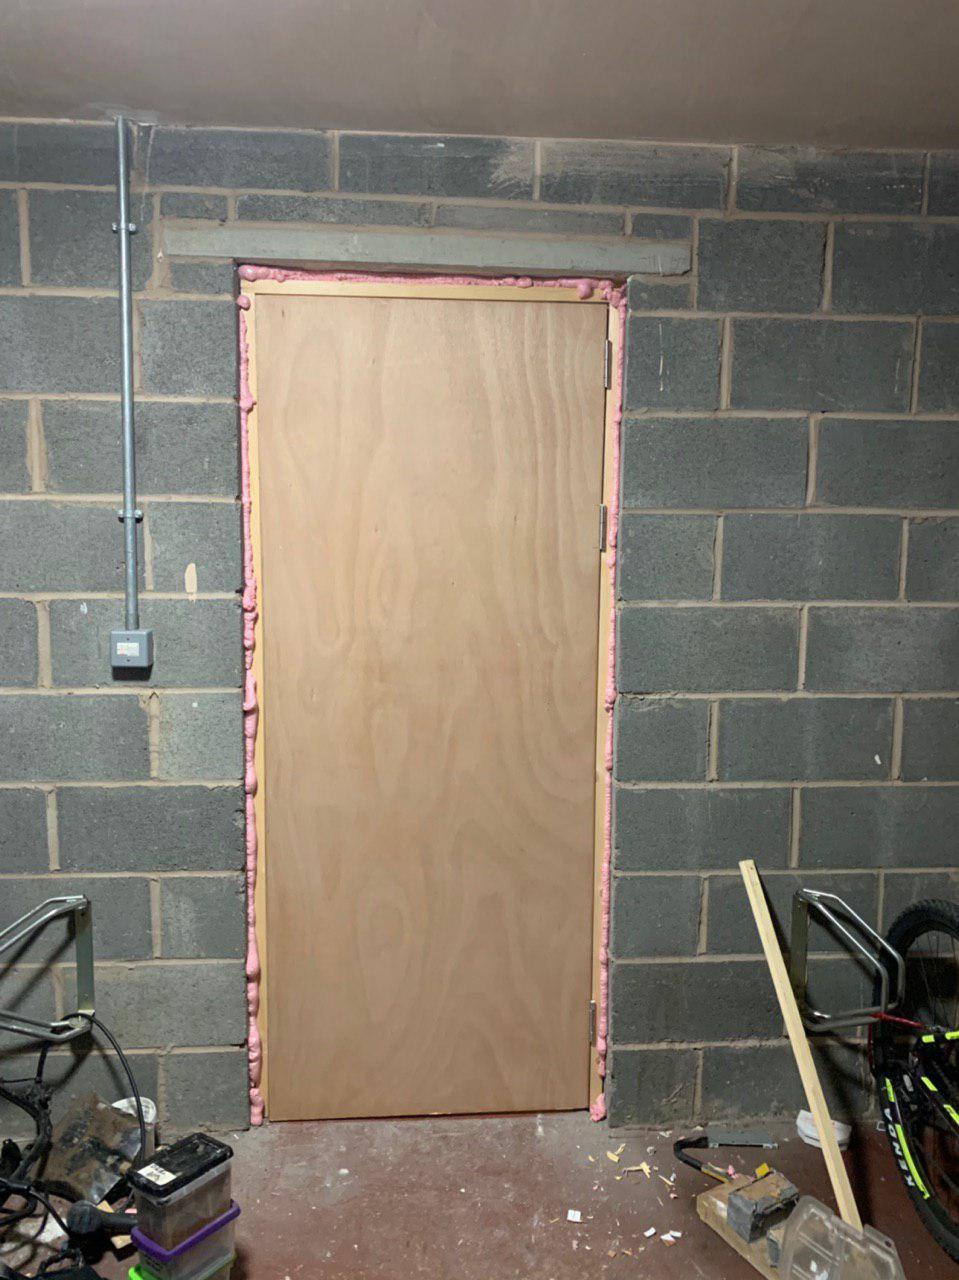 New fire door & frame installed and painted